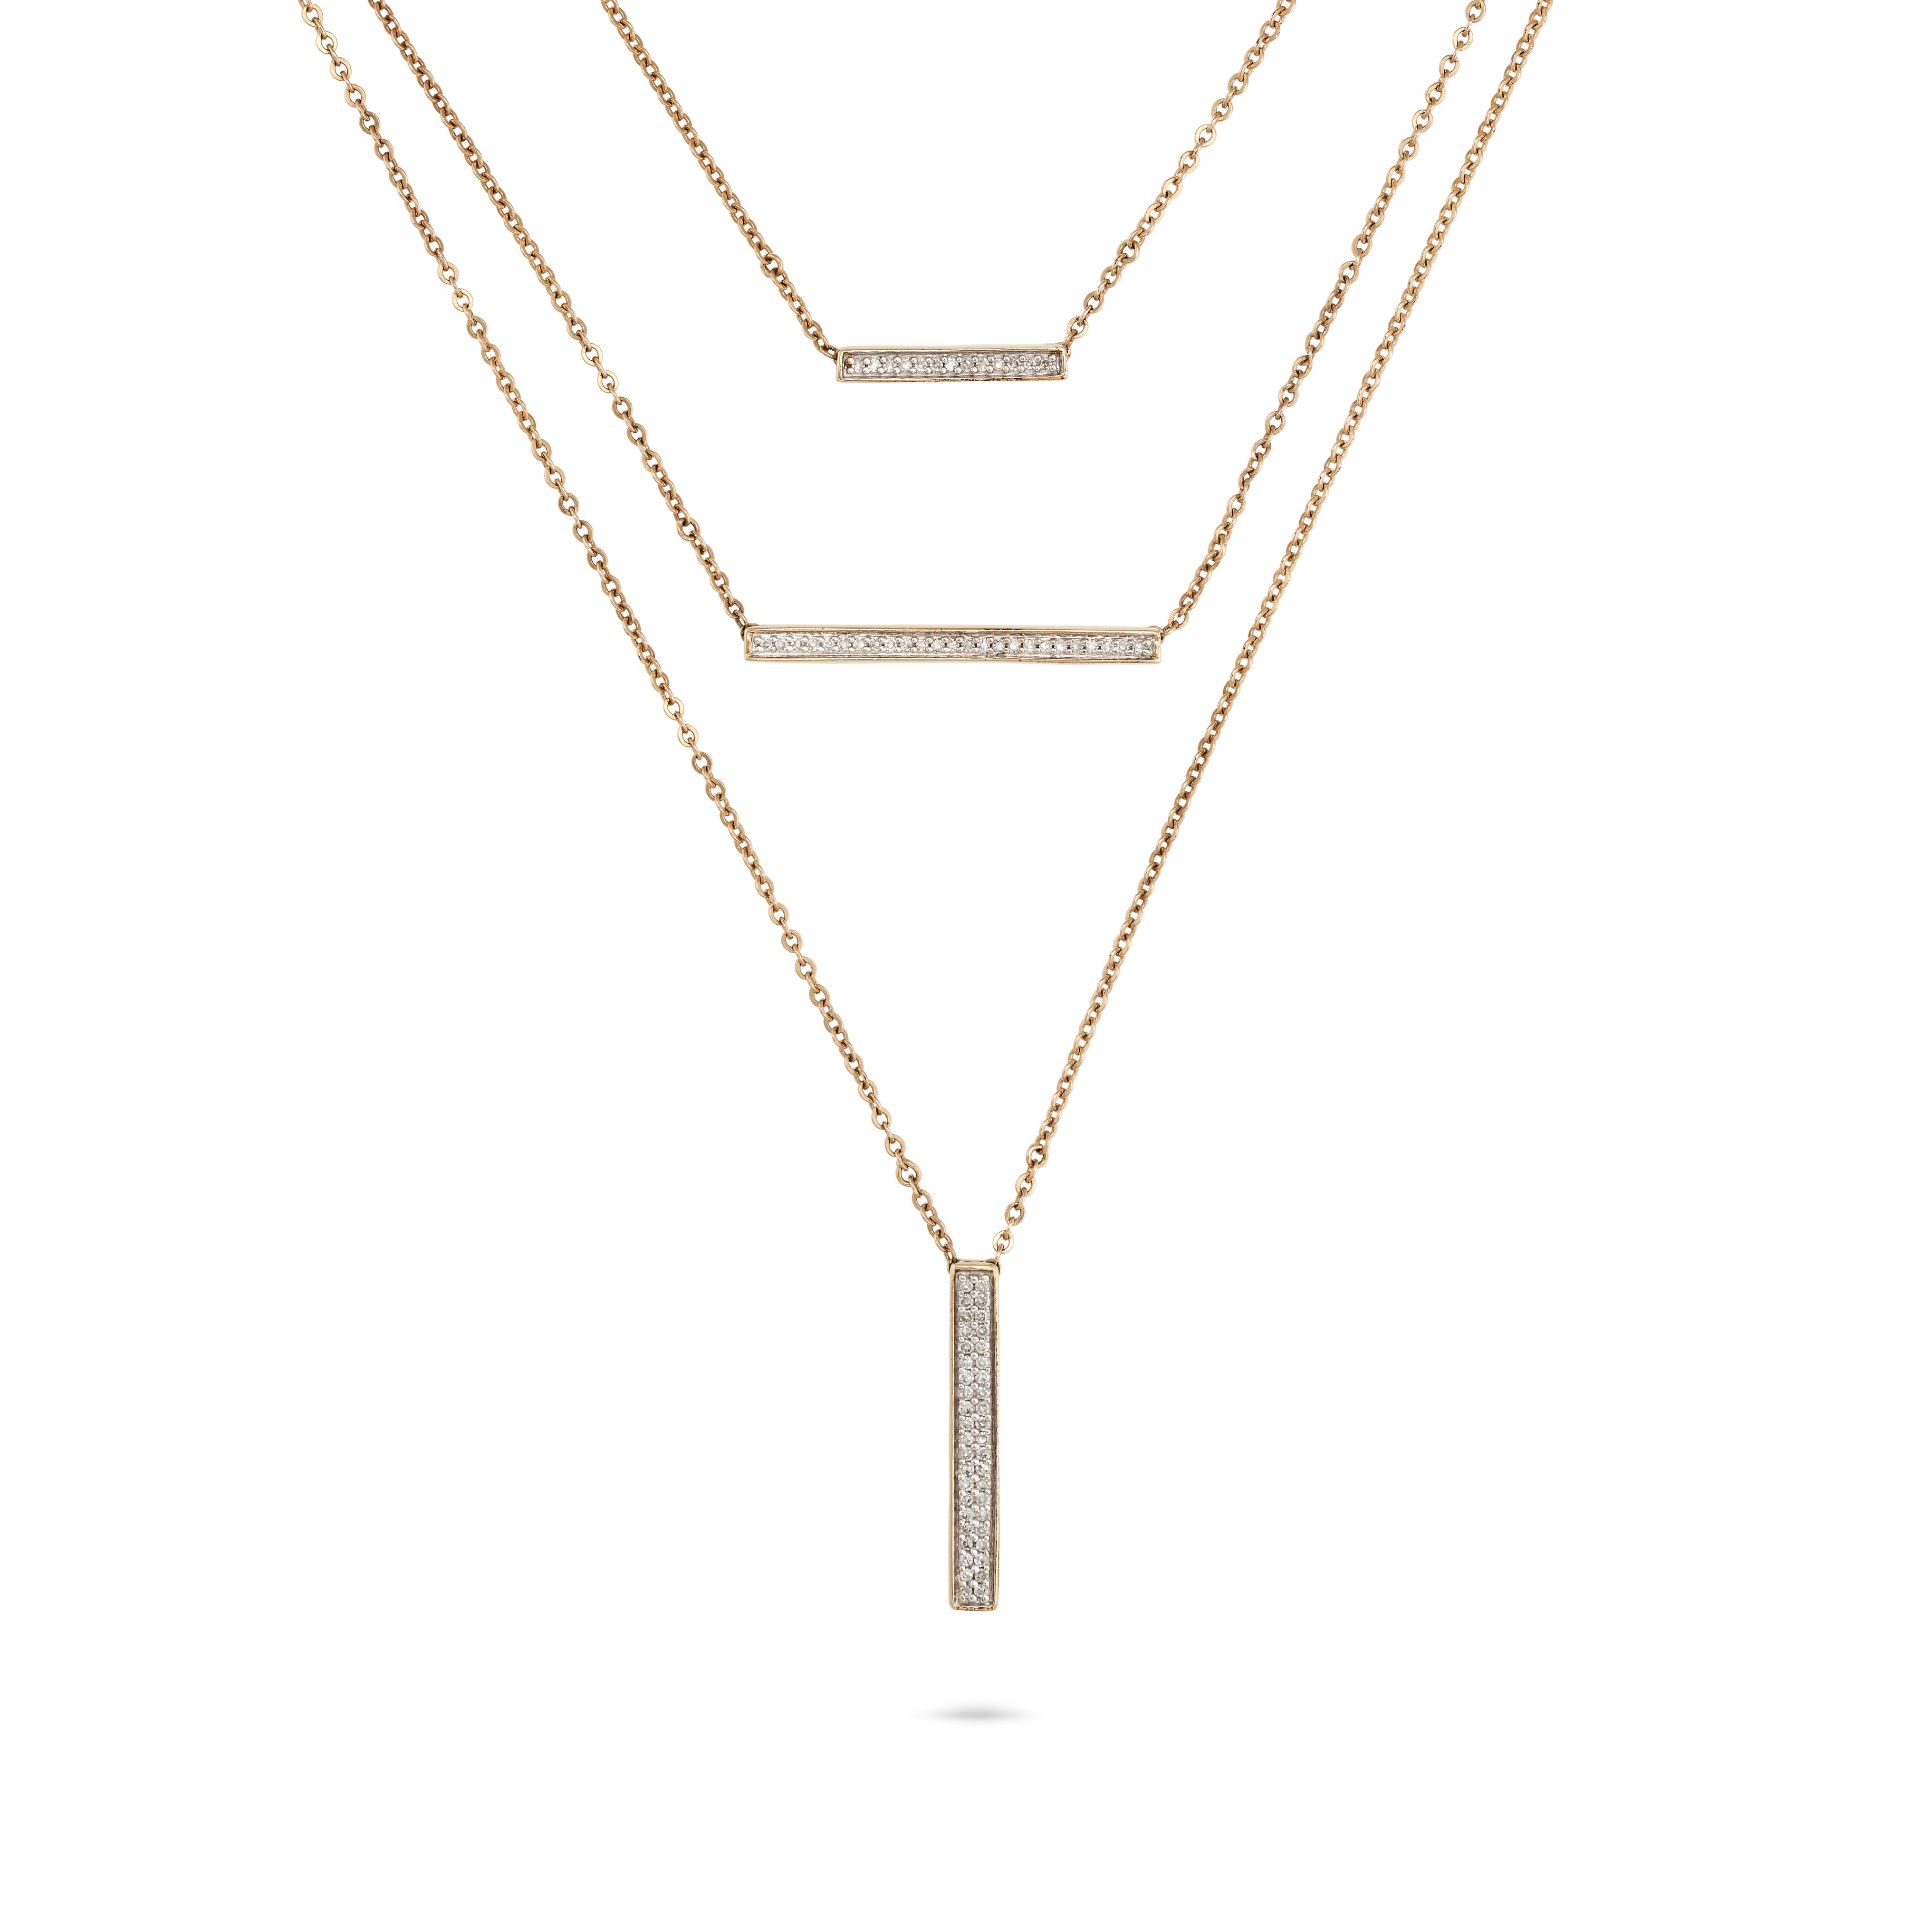 A DIAMOND AND EMERALD PENDANT NECKLACE comprising three rows of trace chain each with a bar set w...